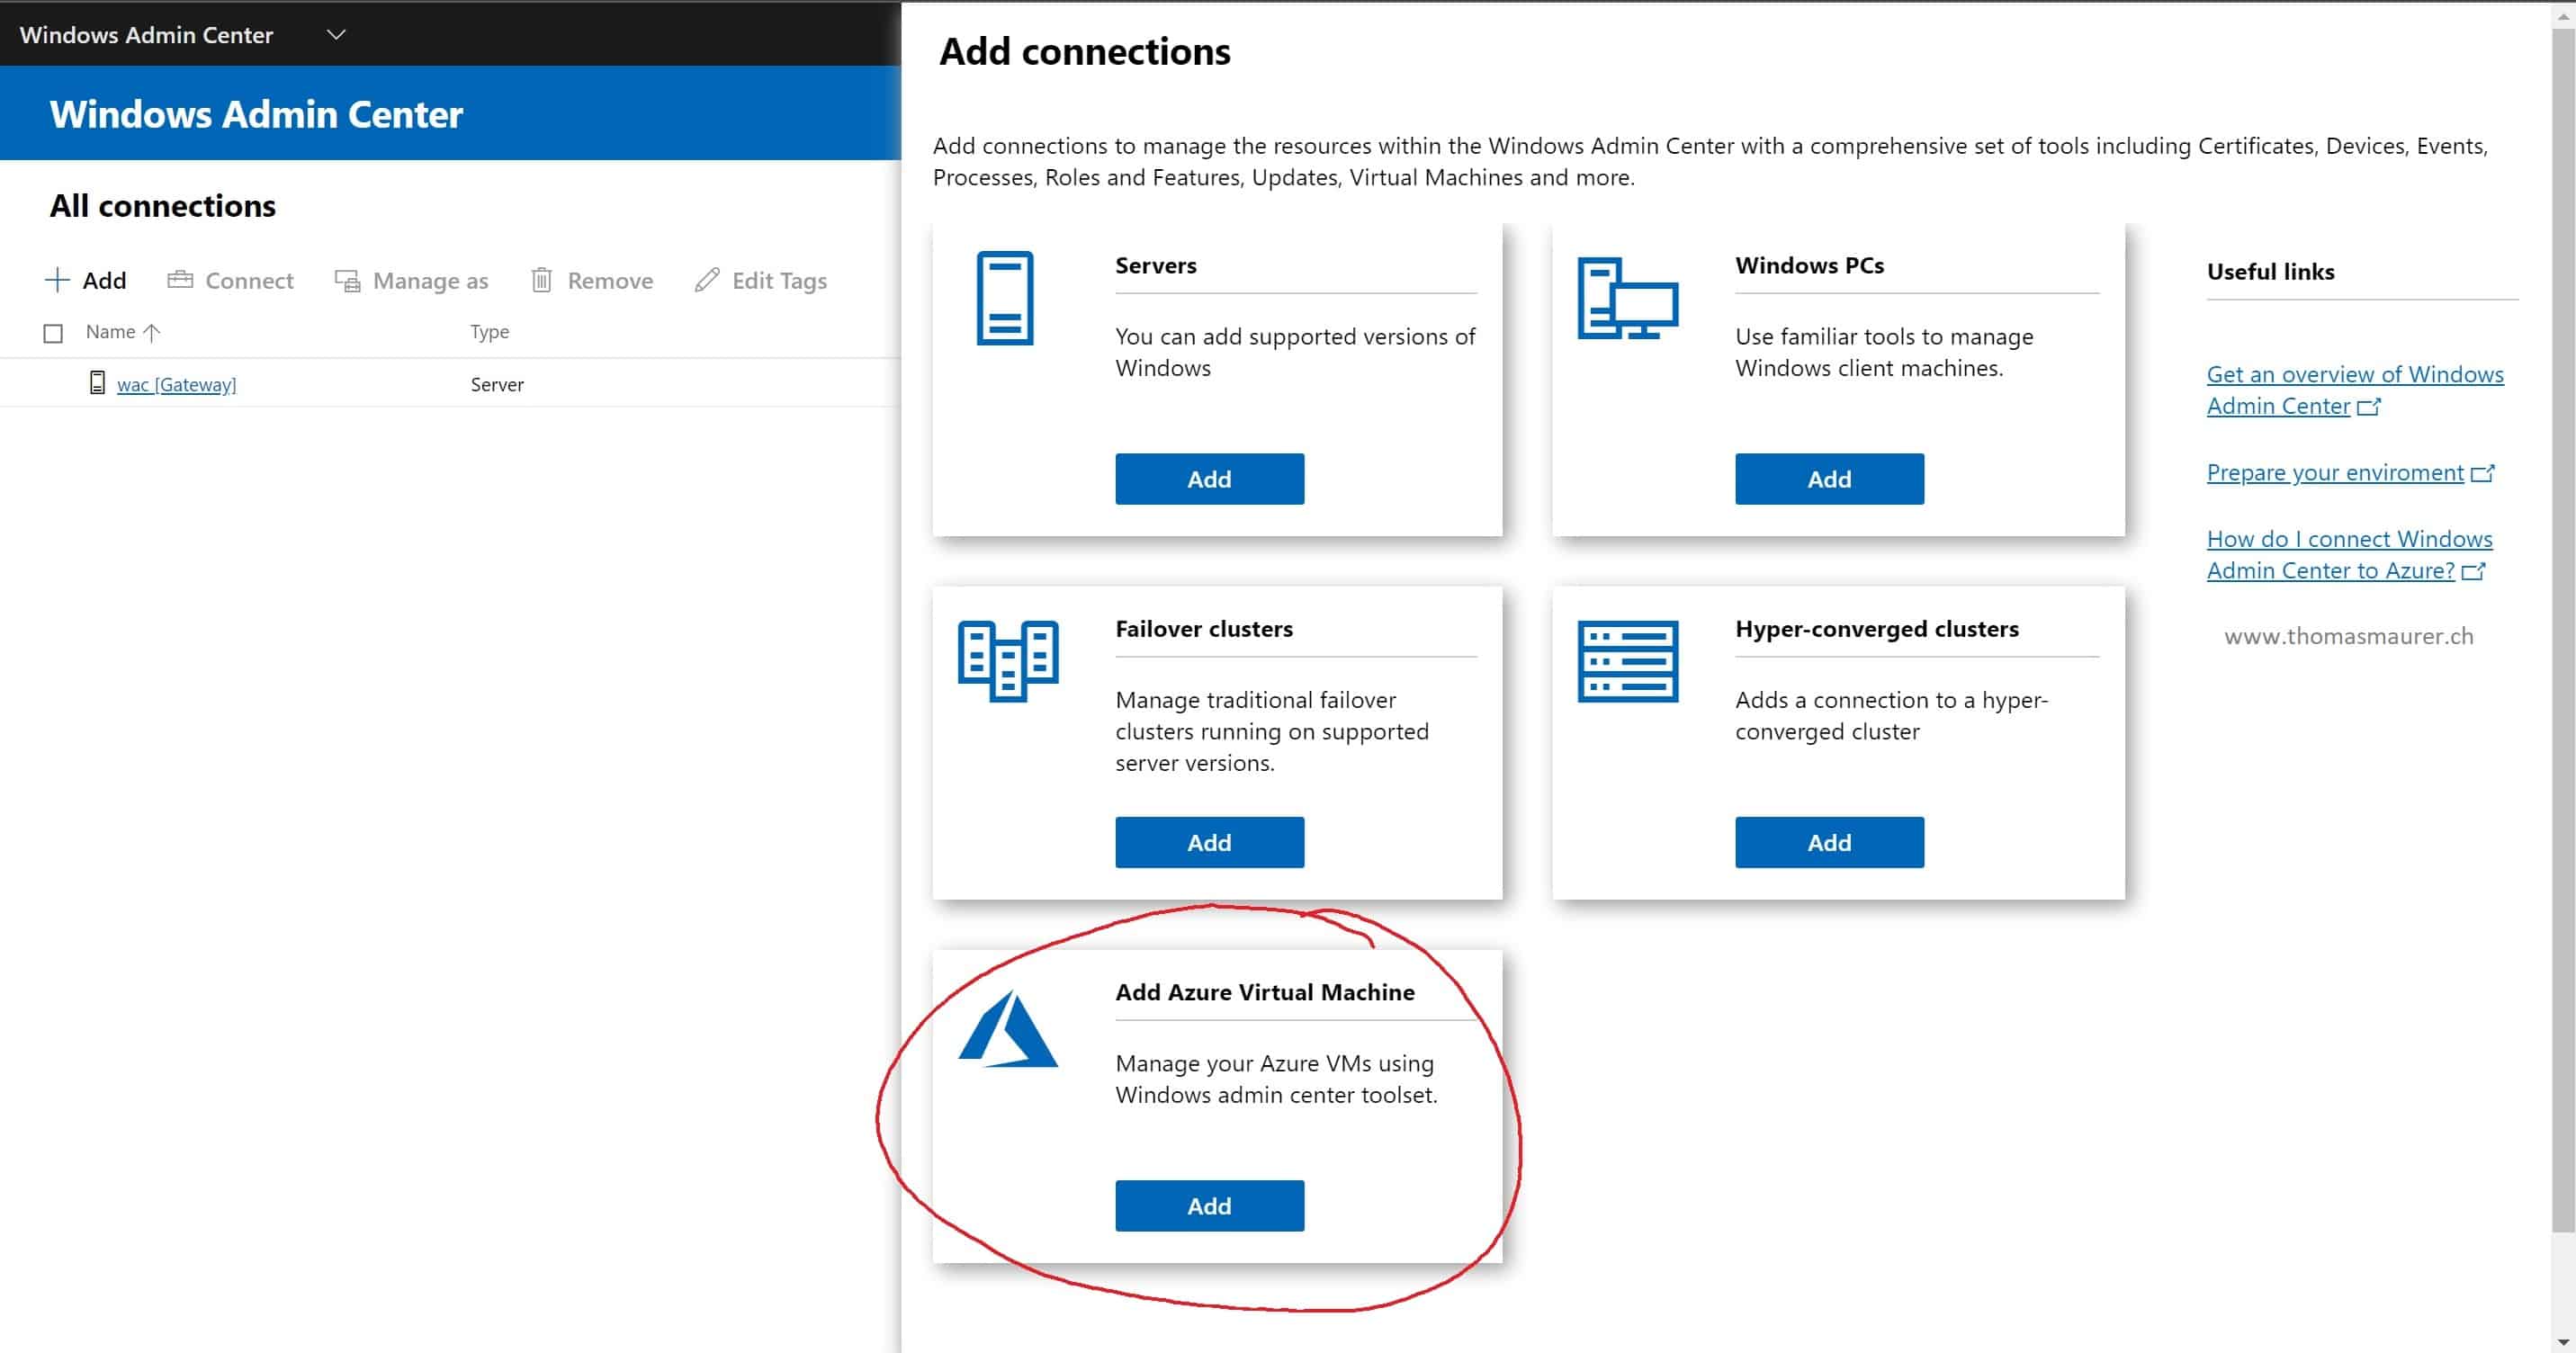 Connect Azure VMs with Windows Admin Center